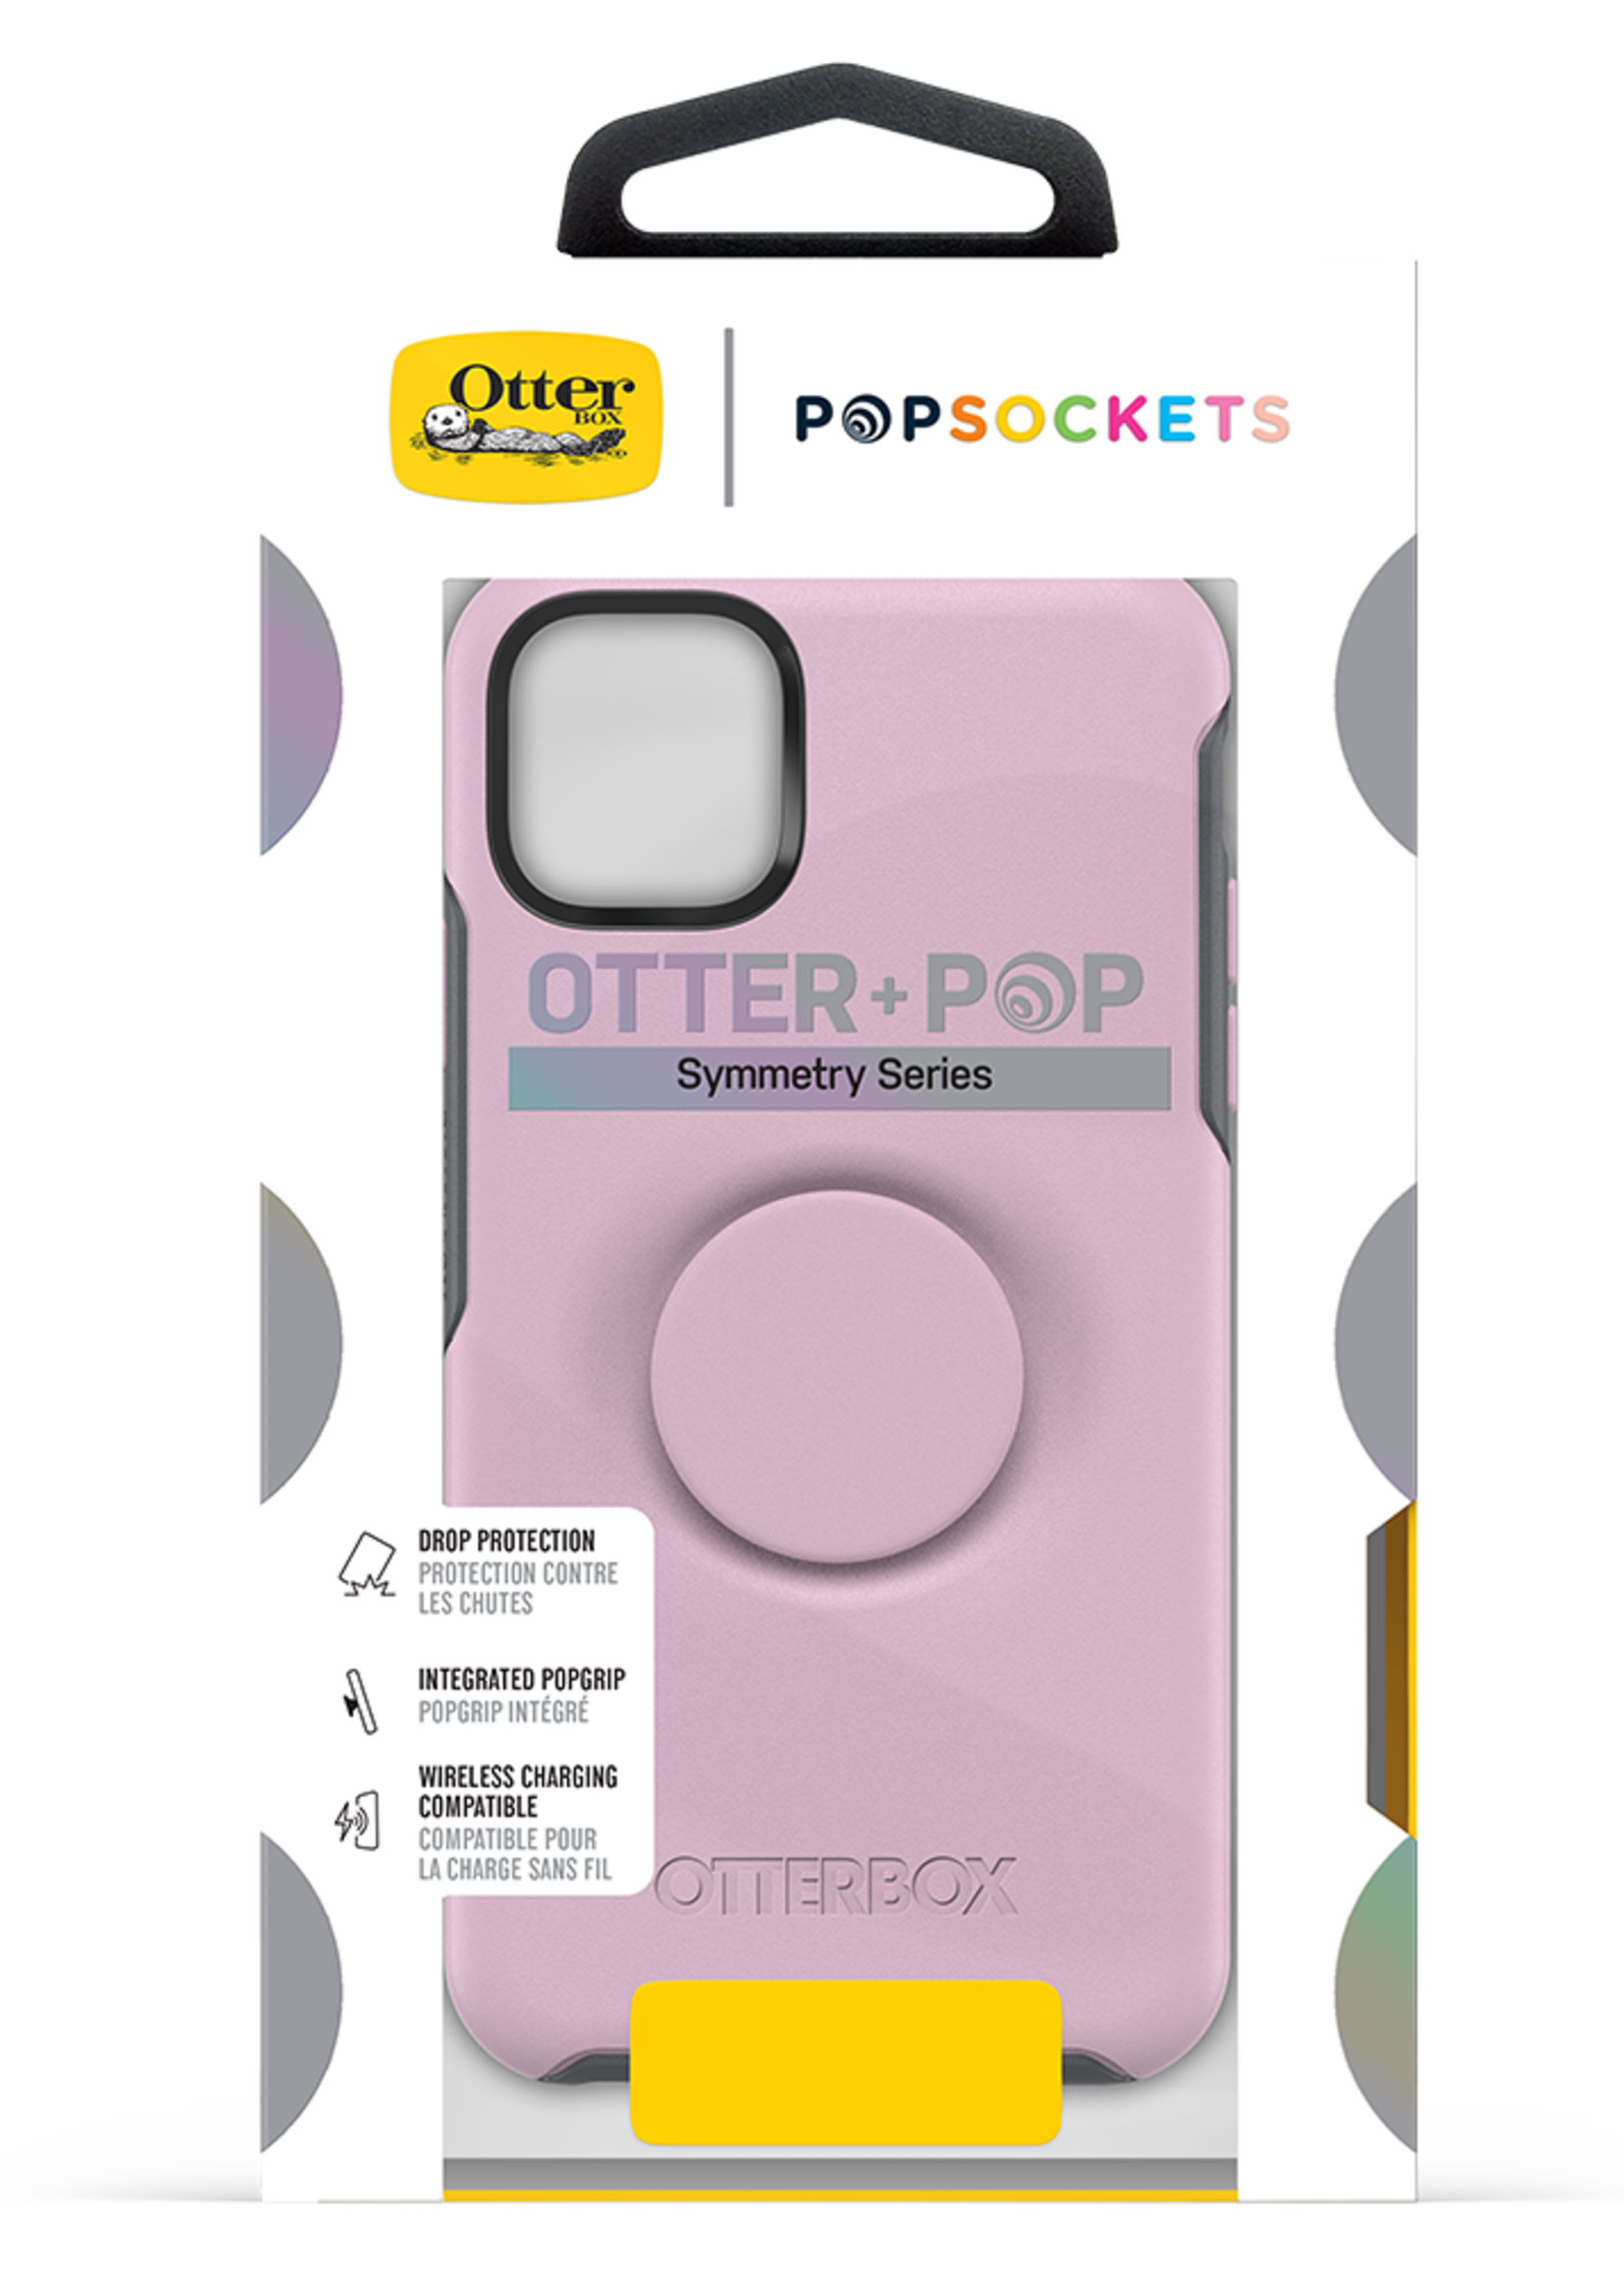 Otterbox OtterBox - Otter + Pop Symmetry Case with PopGrip for Apple iPhone 11 Pro Max - Mauvelous